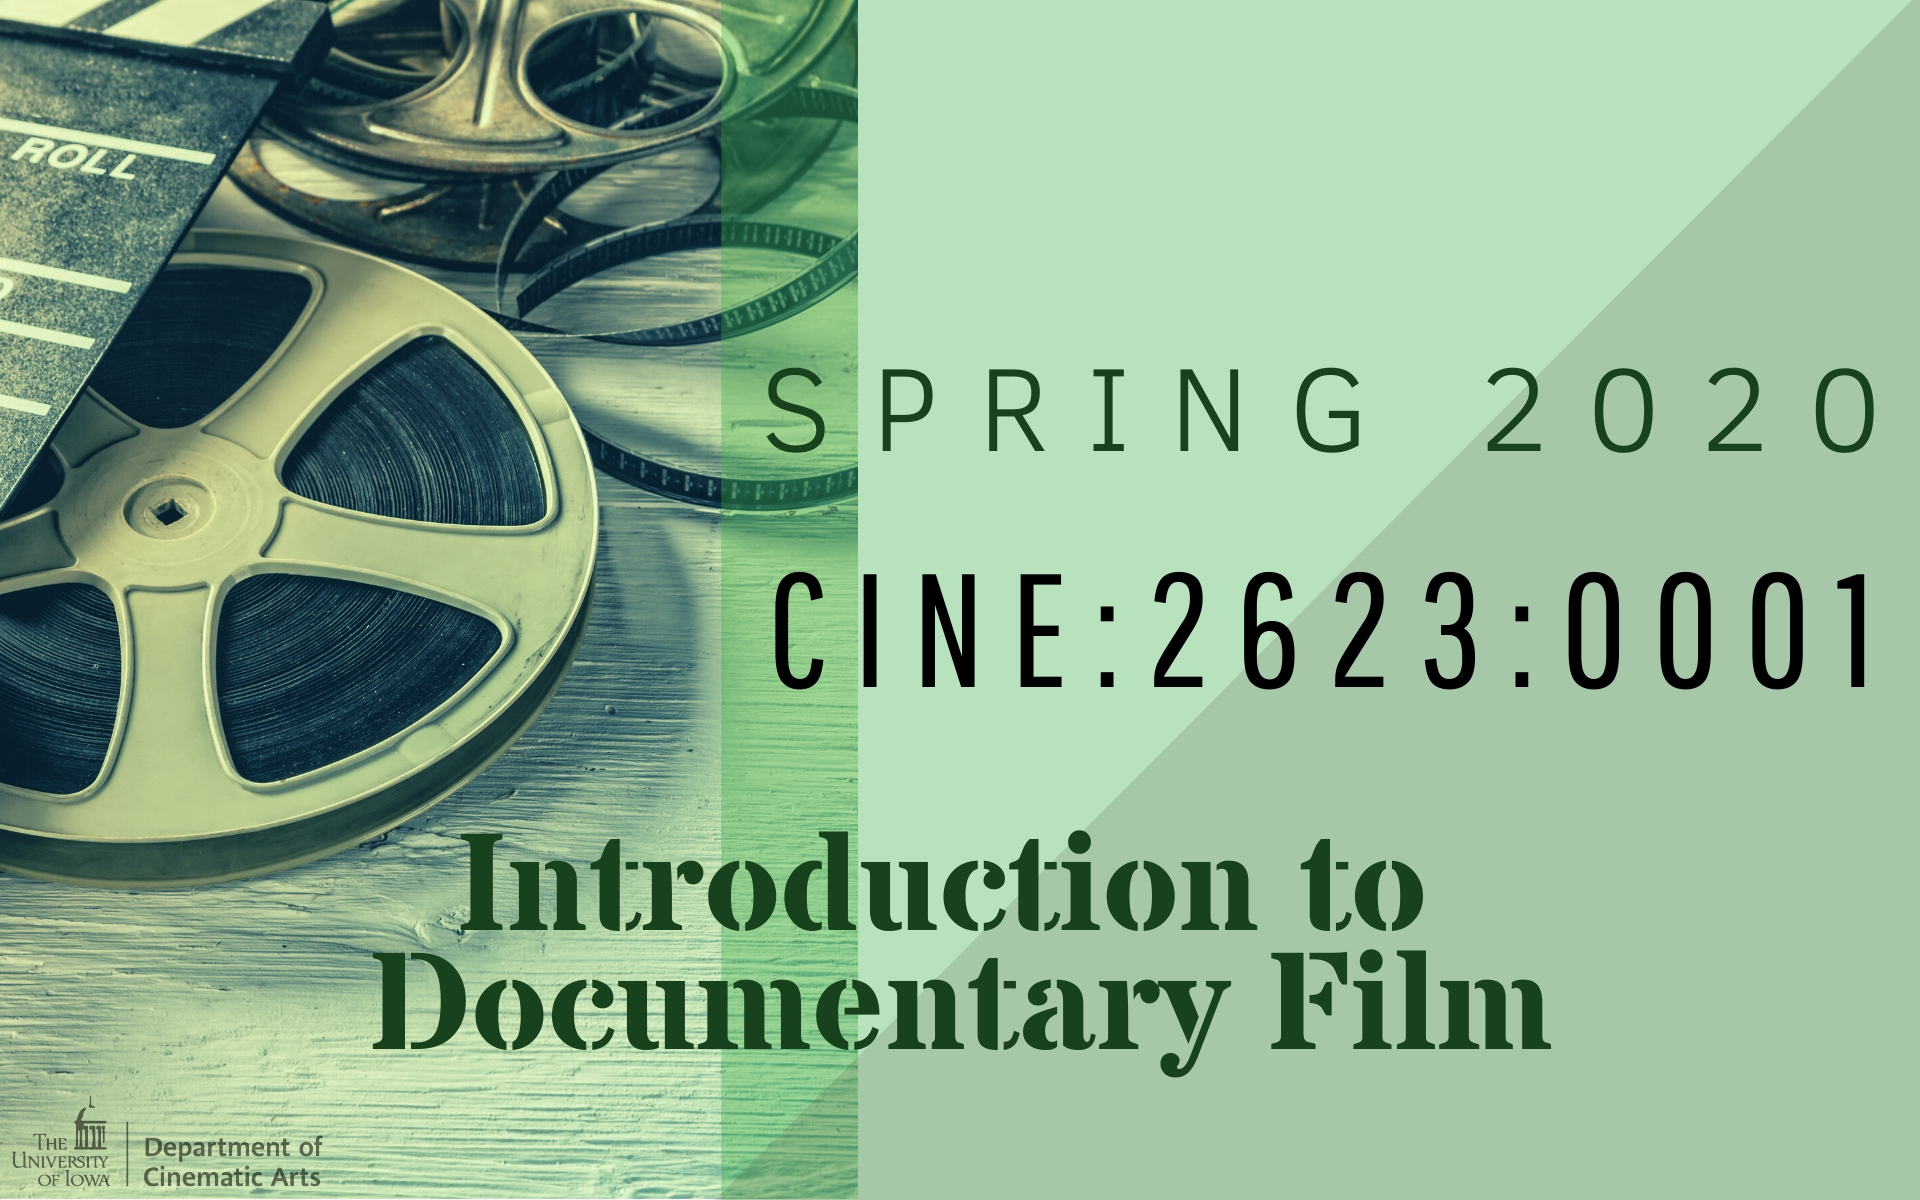 Image of film reels, text: "Introduction to documentary film"